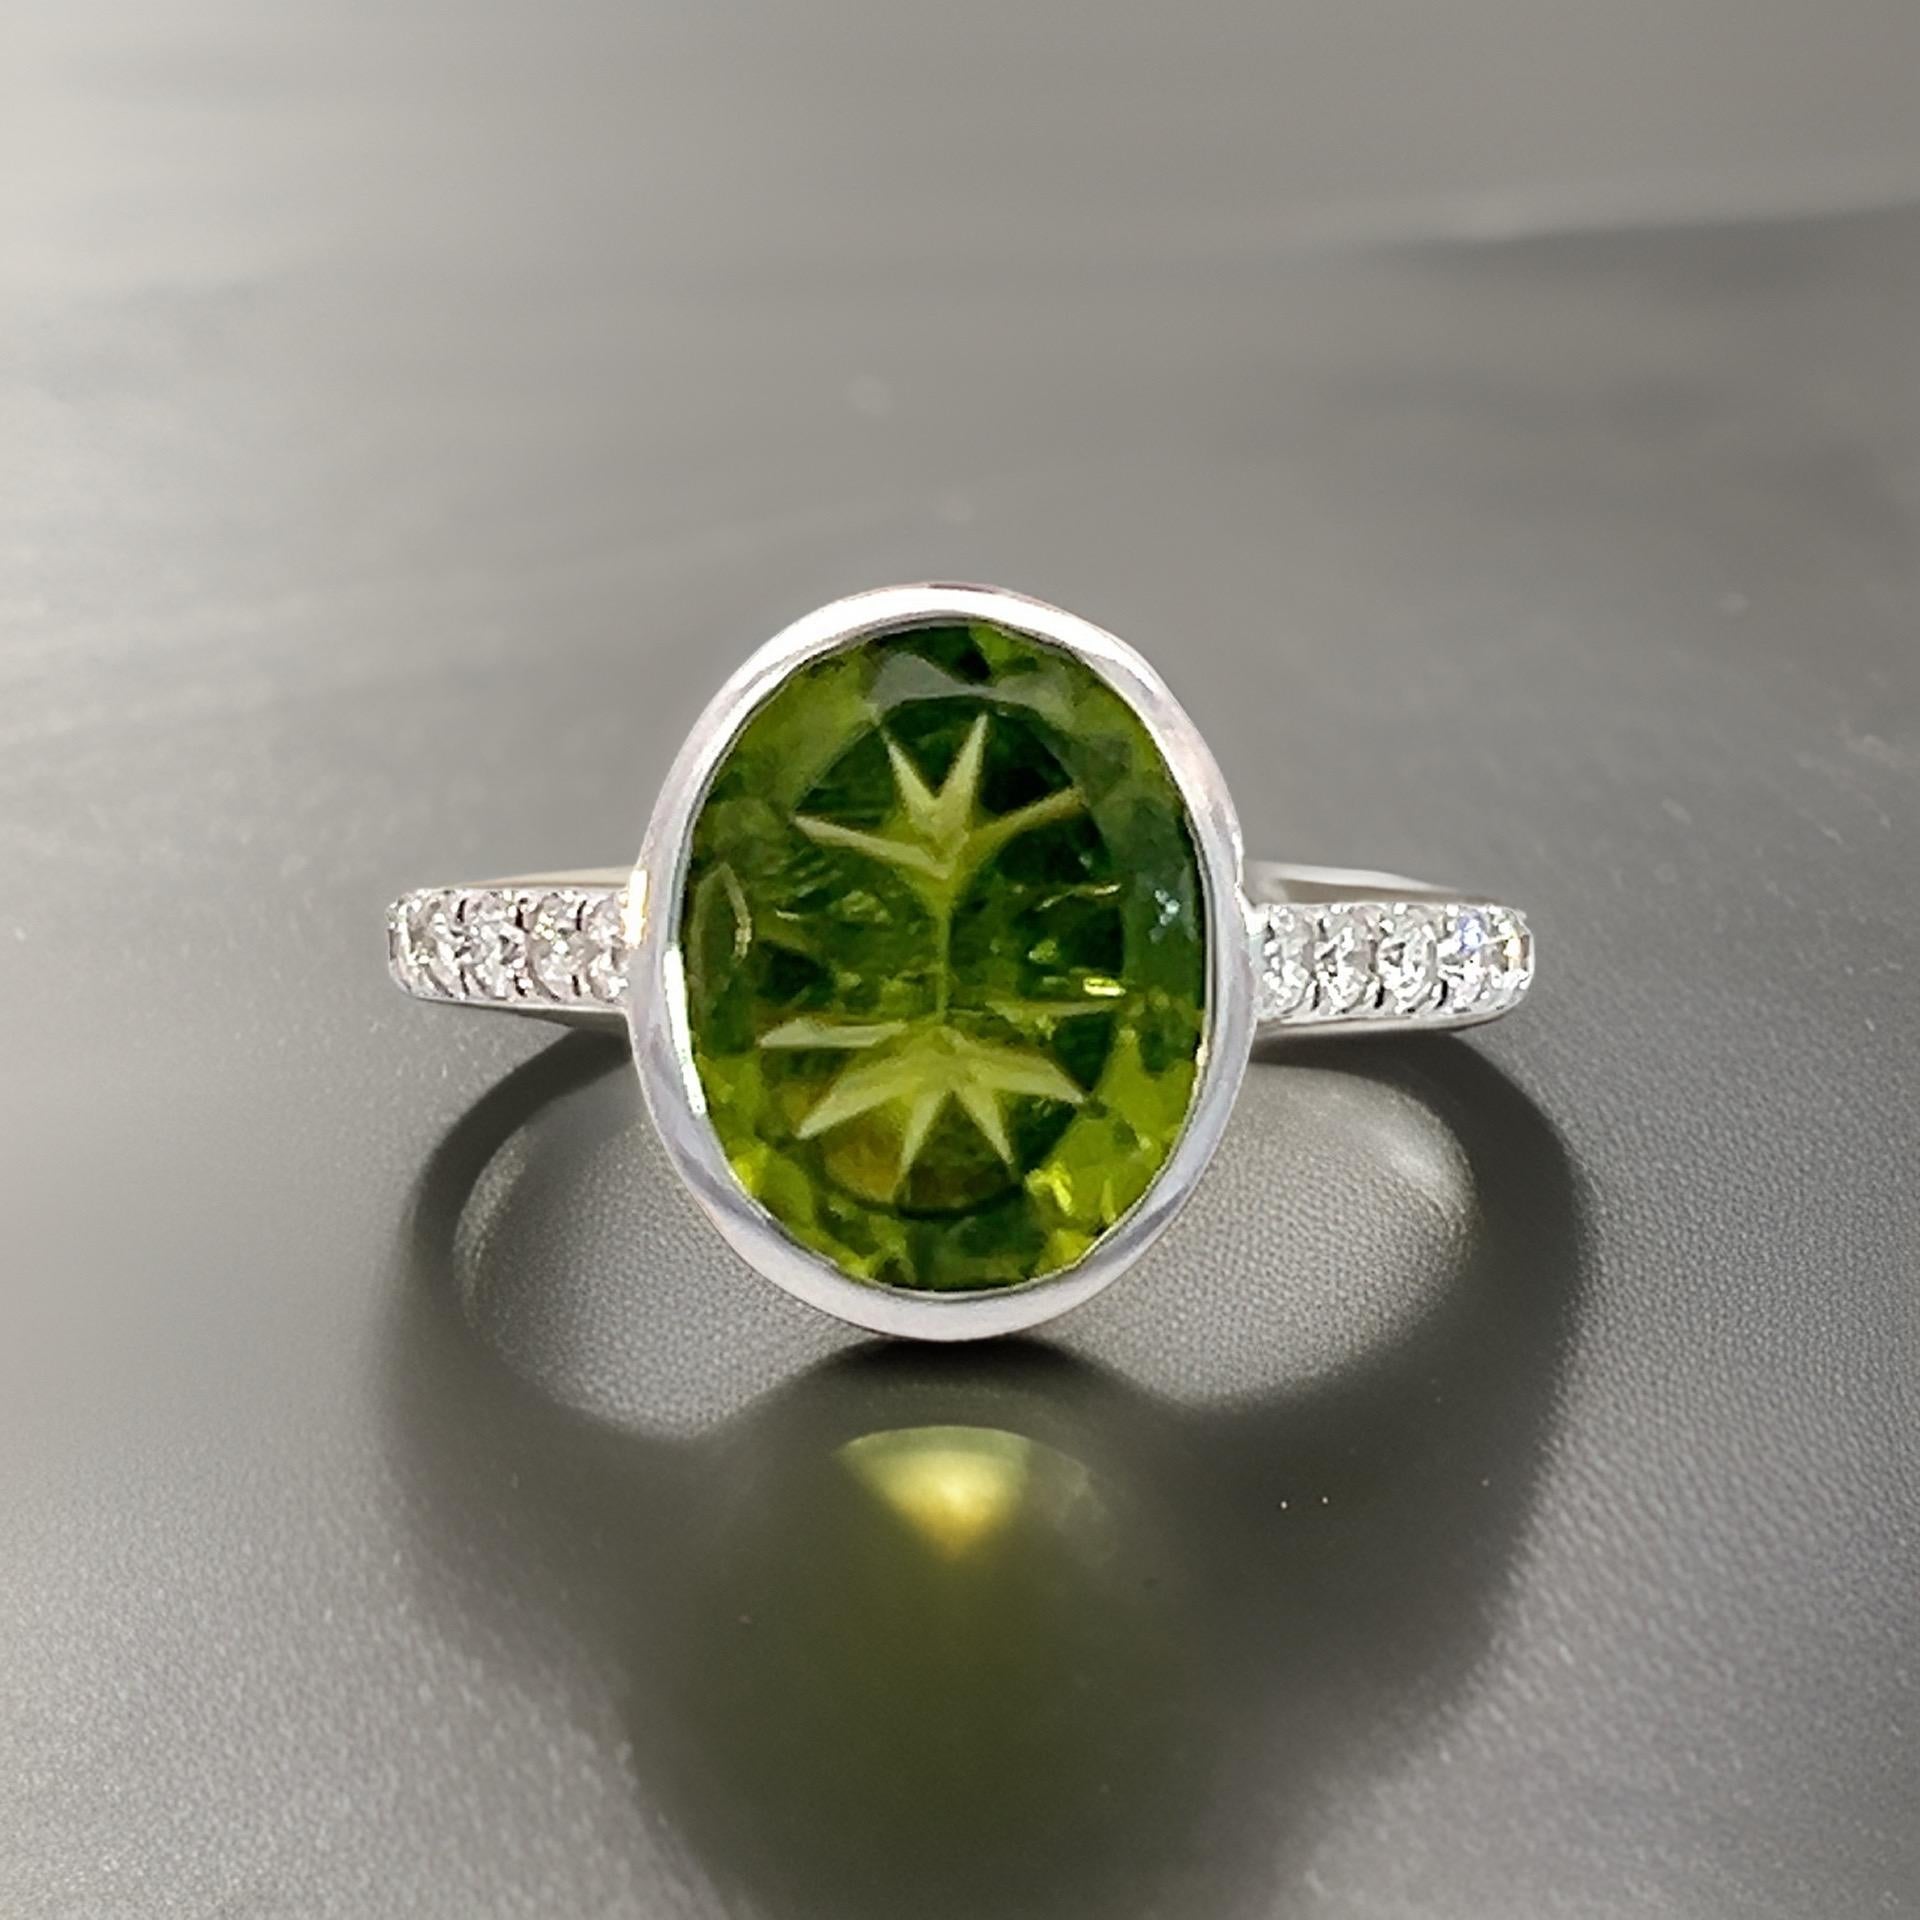 Natural Peridot Diamond Ring 6.5 14k W Gold 3.49 TCW Certified For Sale 10